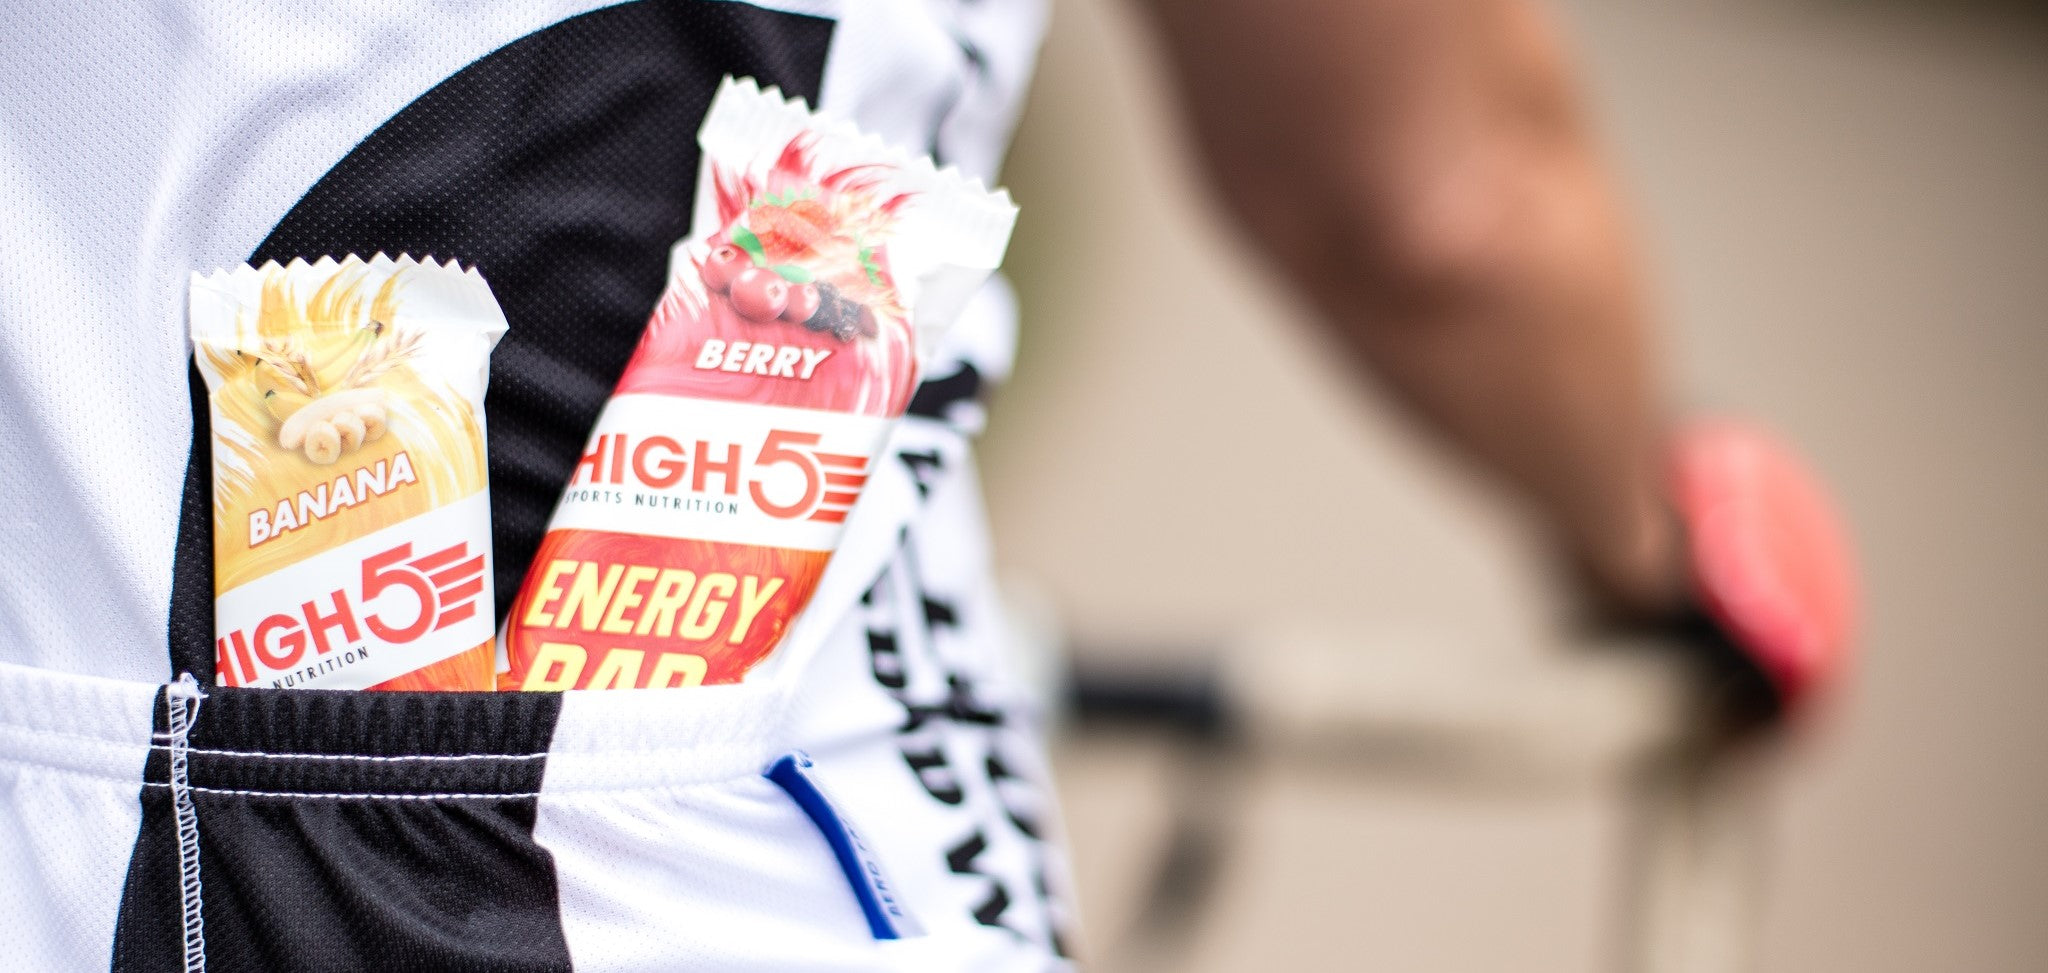 HIGH5 Energy Bars in a cycling jersey